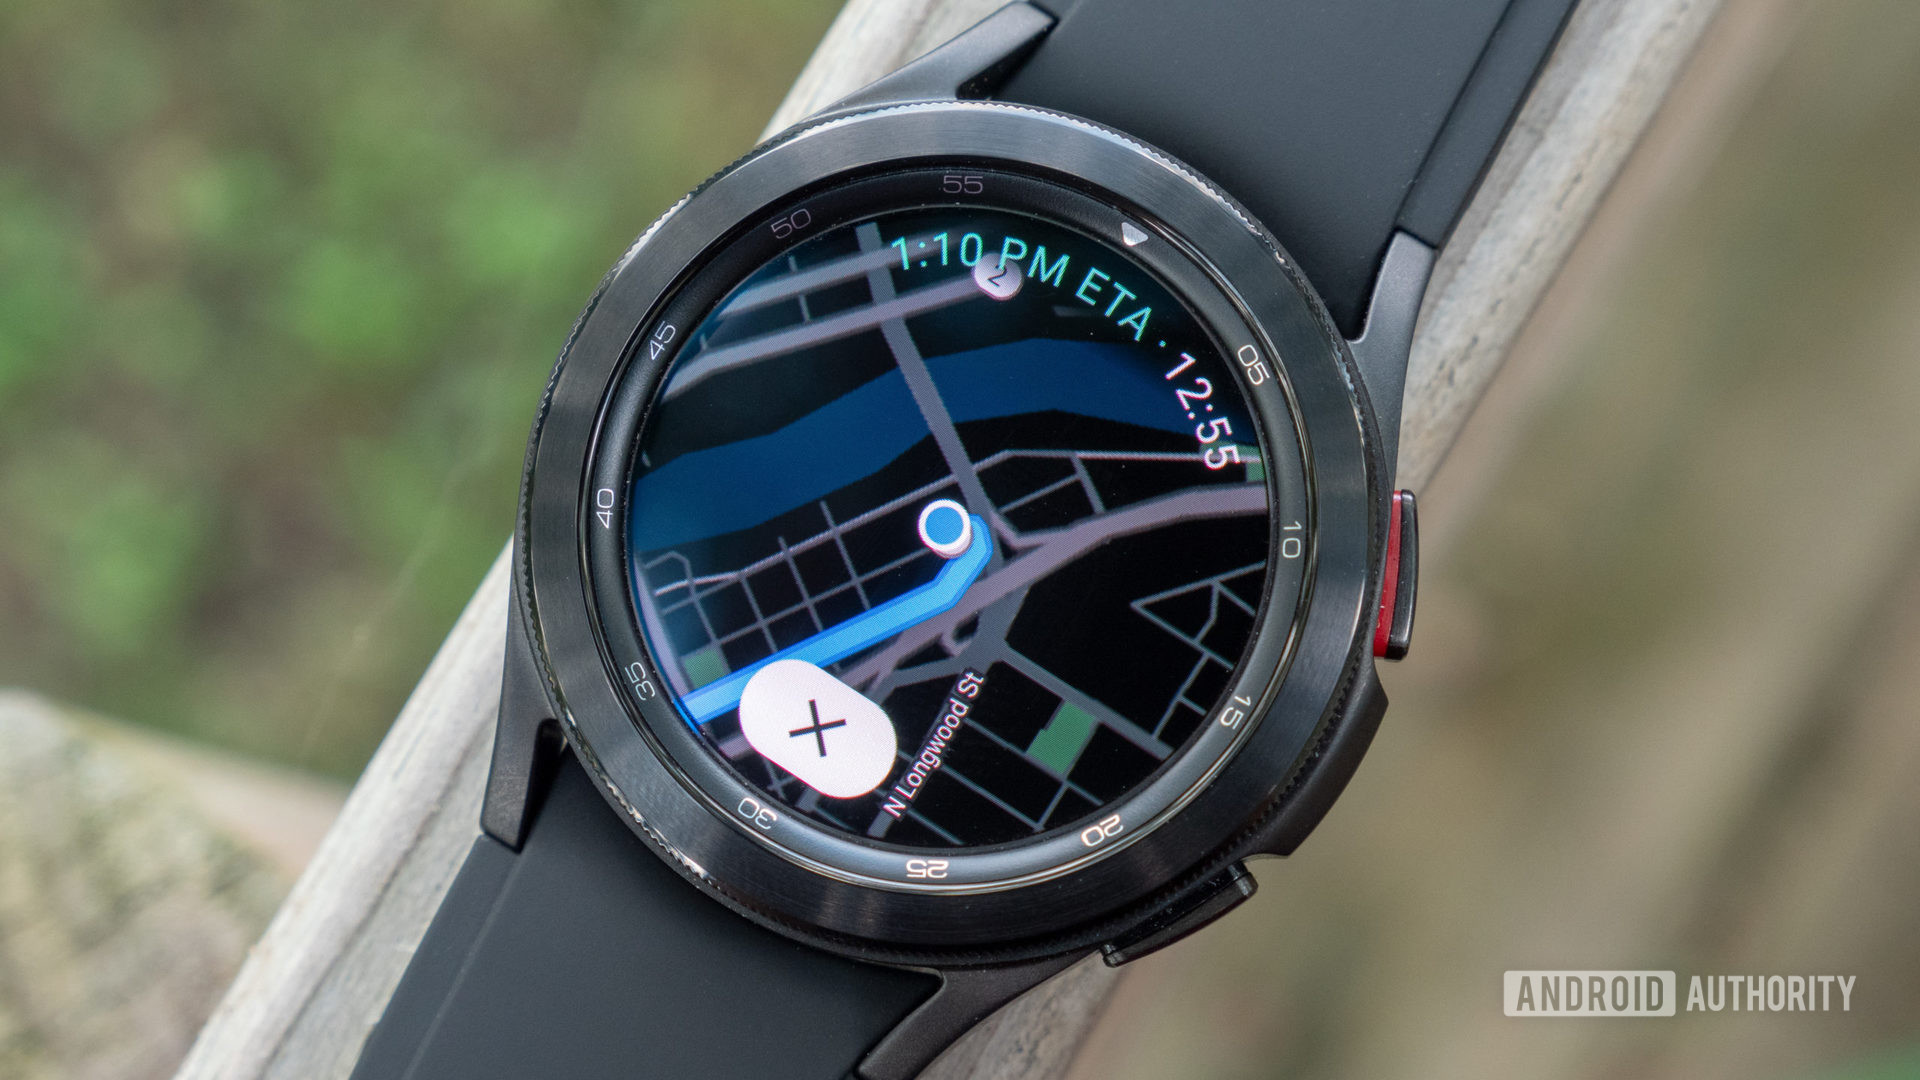 The new google maps application on the samsung galaxy watch 4